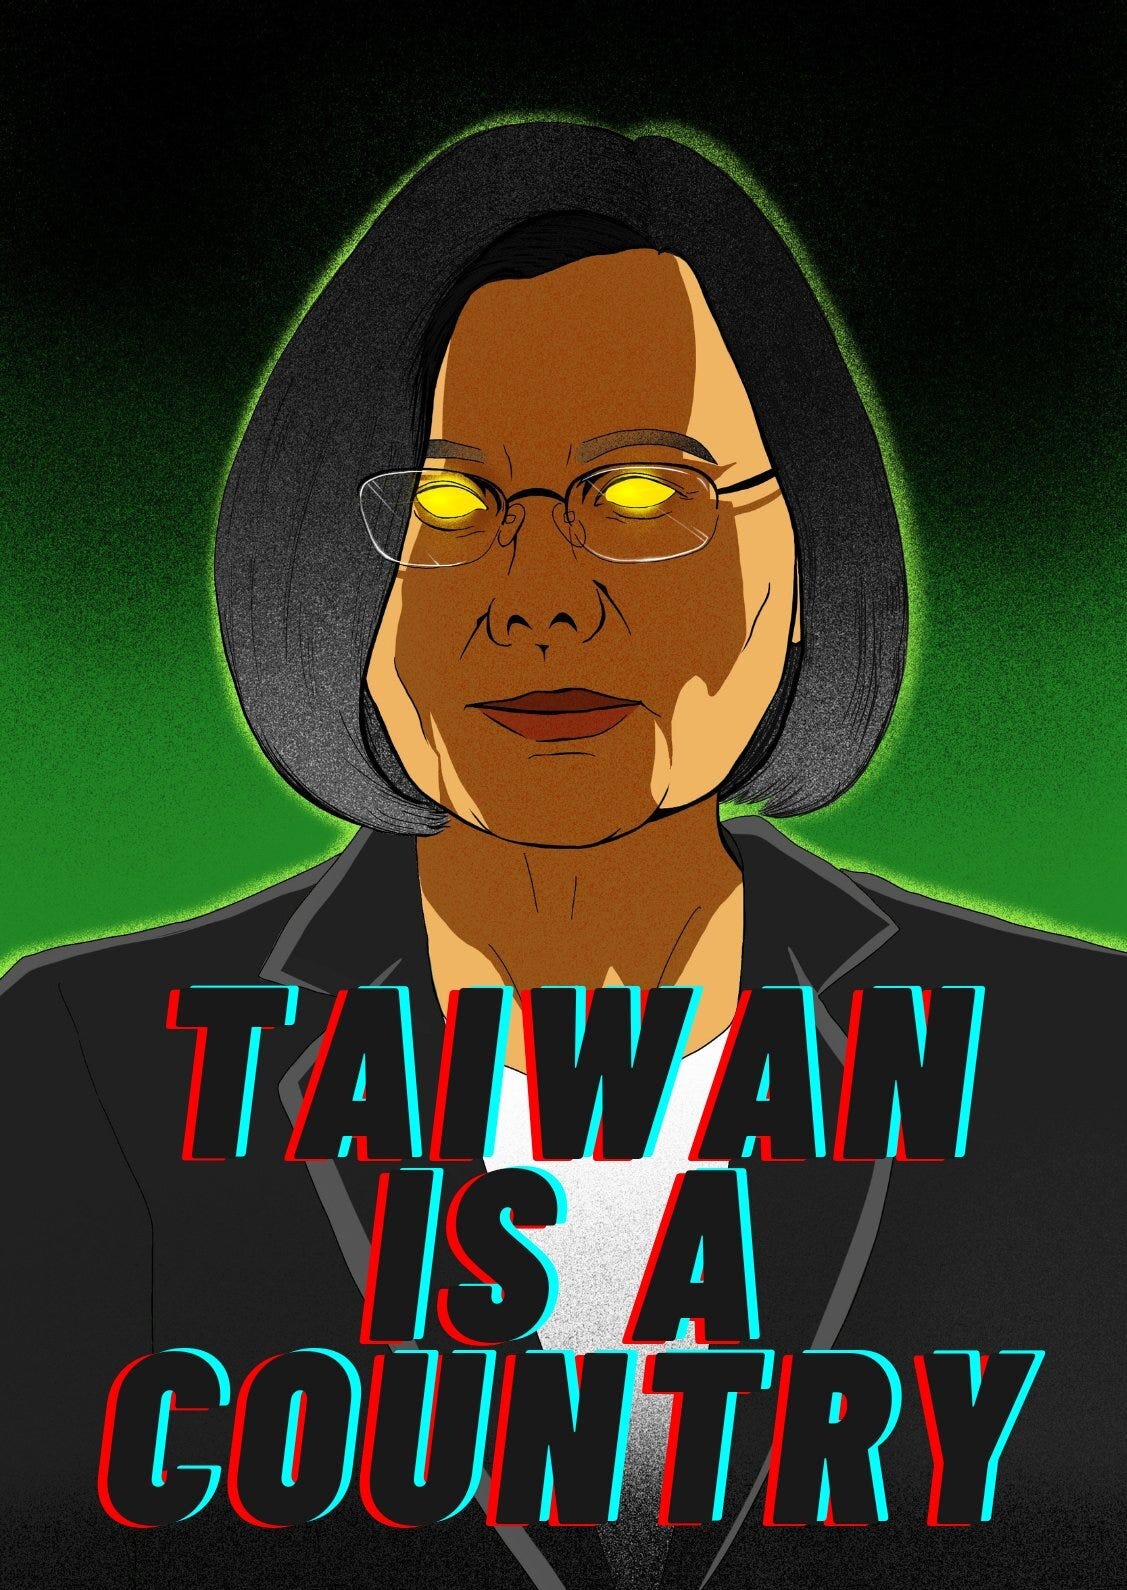 A cartoon showing the text “Taiwan is a country” superimposed on a picture of Taiwanese president Tsai Ing-wen with glowing eyes.